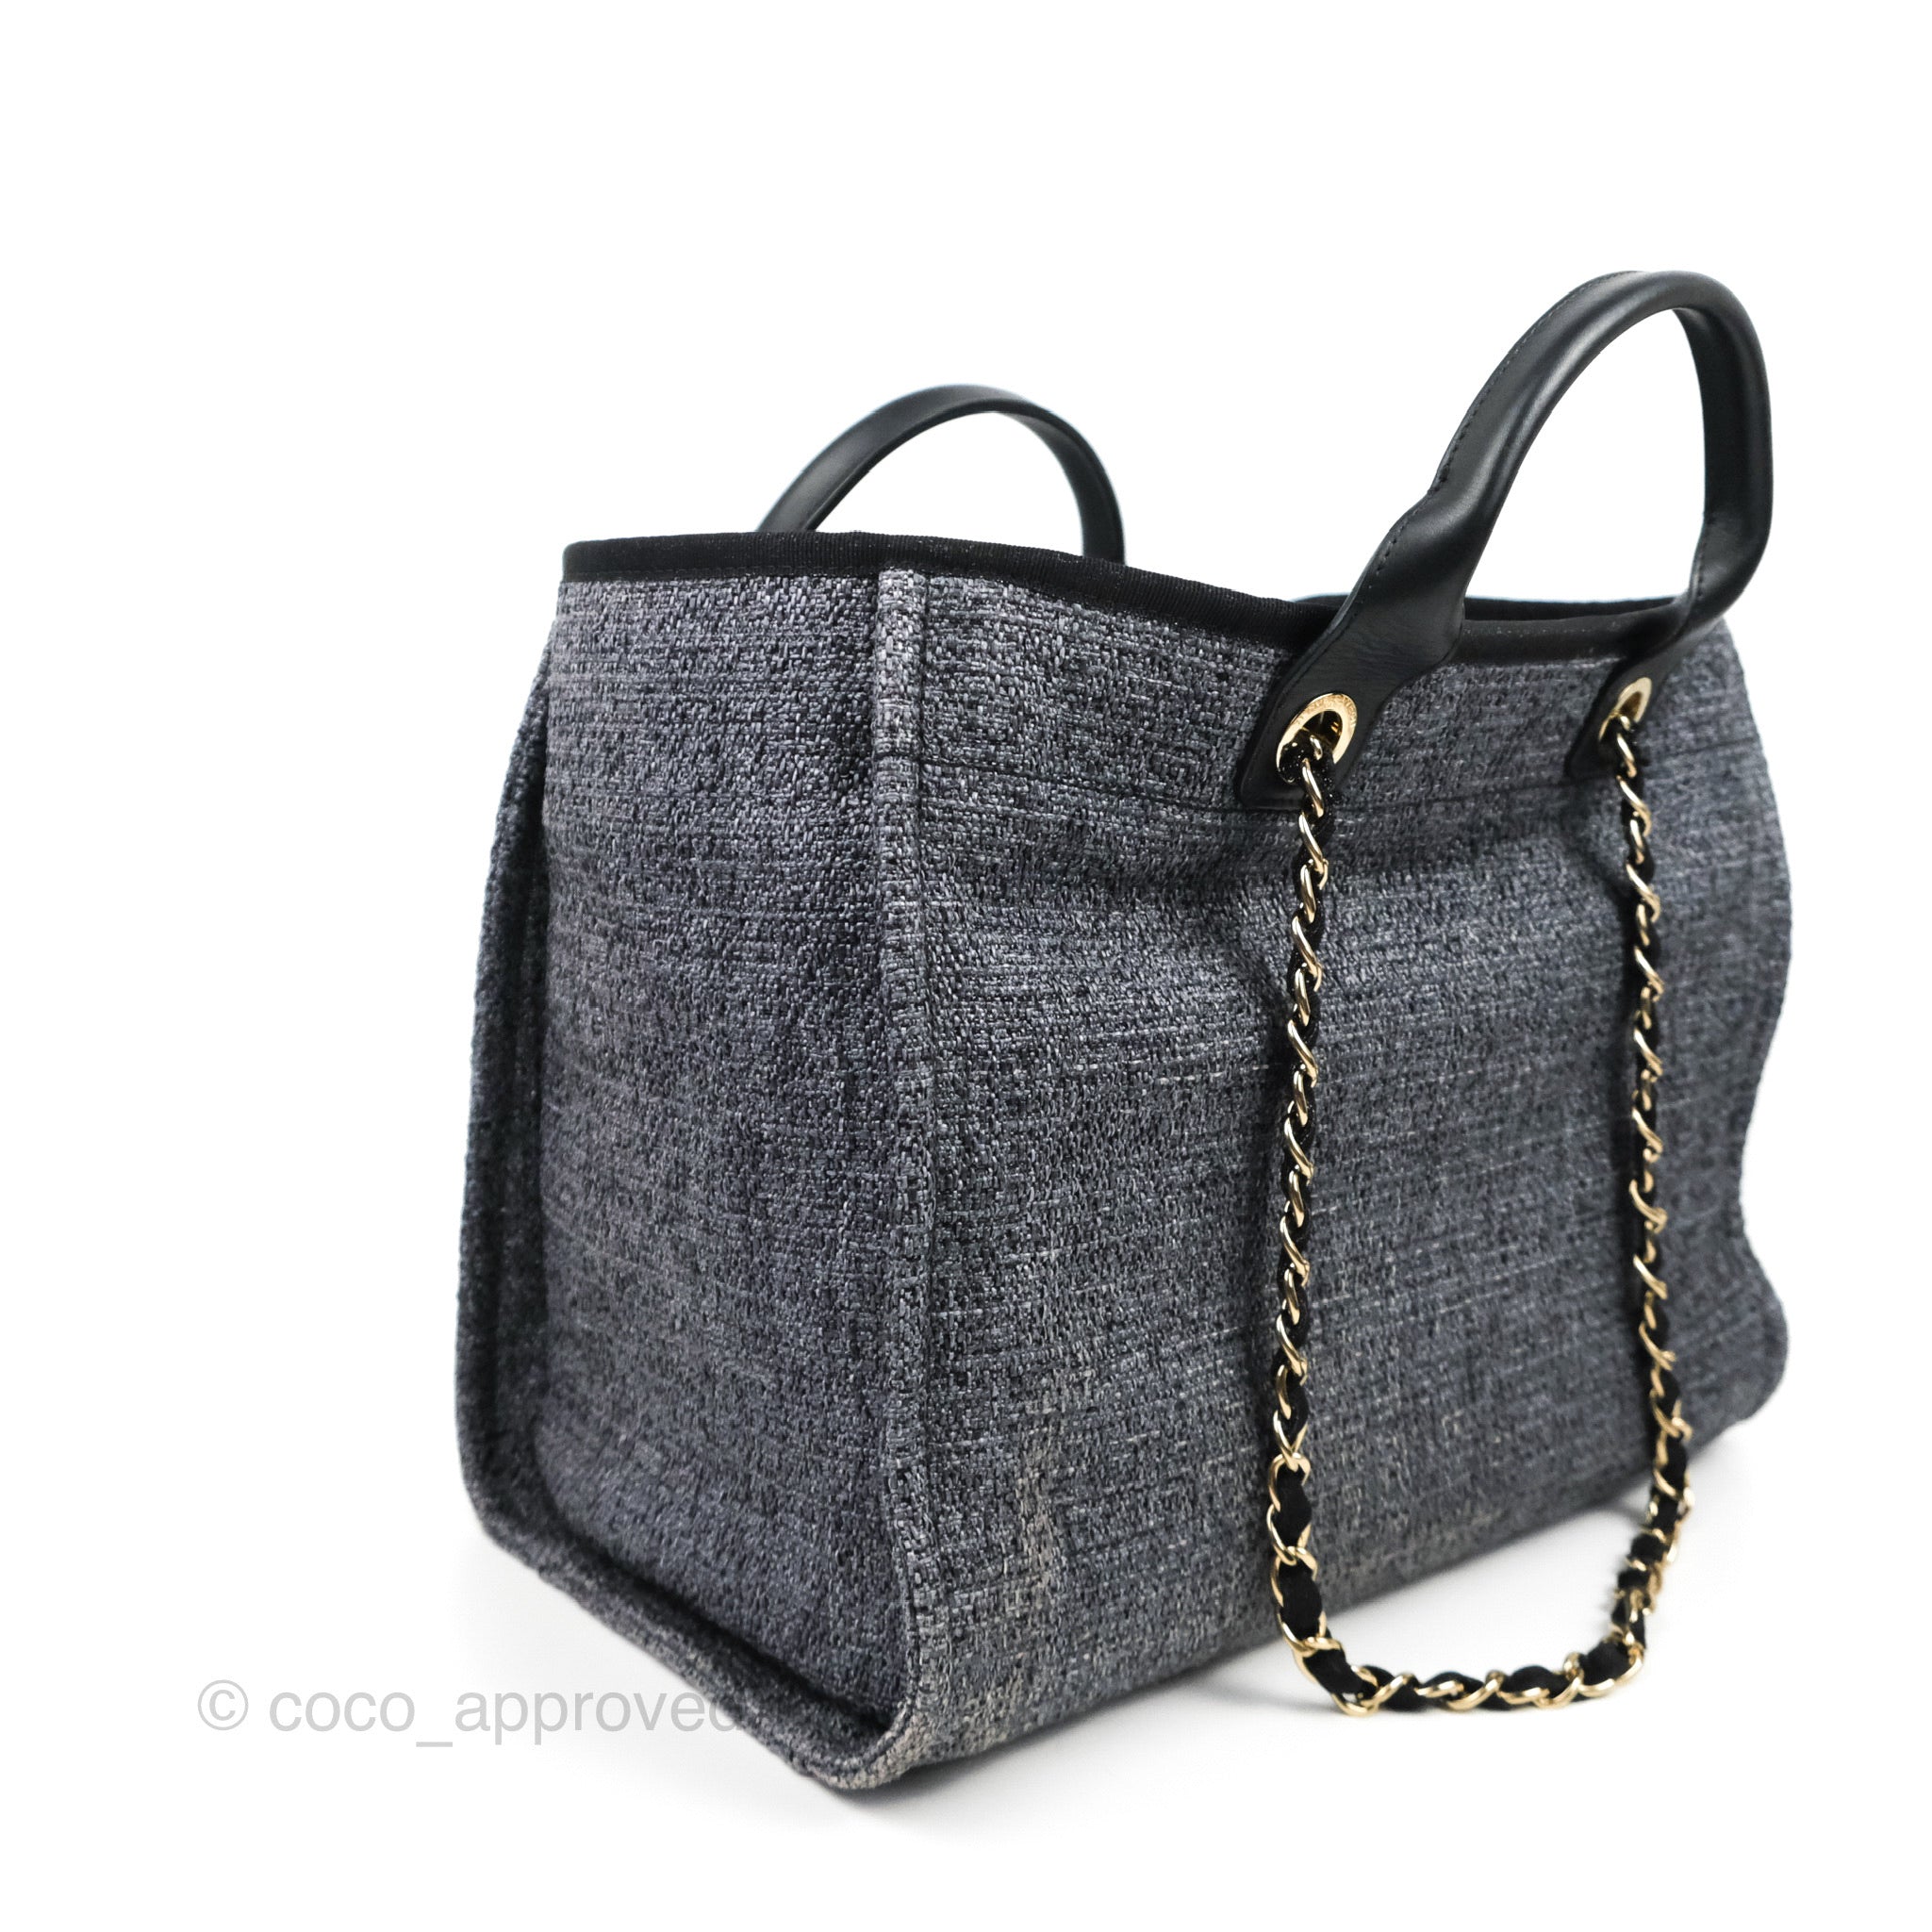 CHANEL DEAUVILLE SMALL TOTE BAG, CHARCOAL